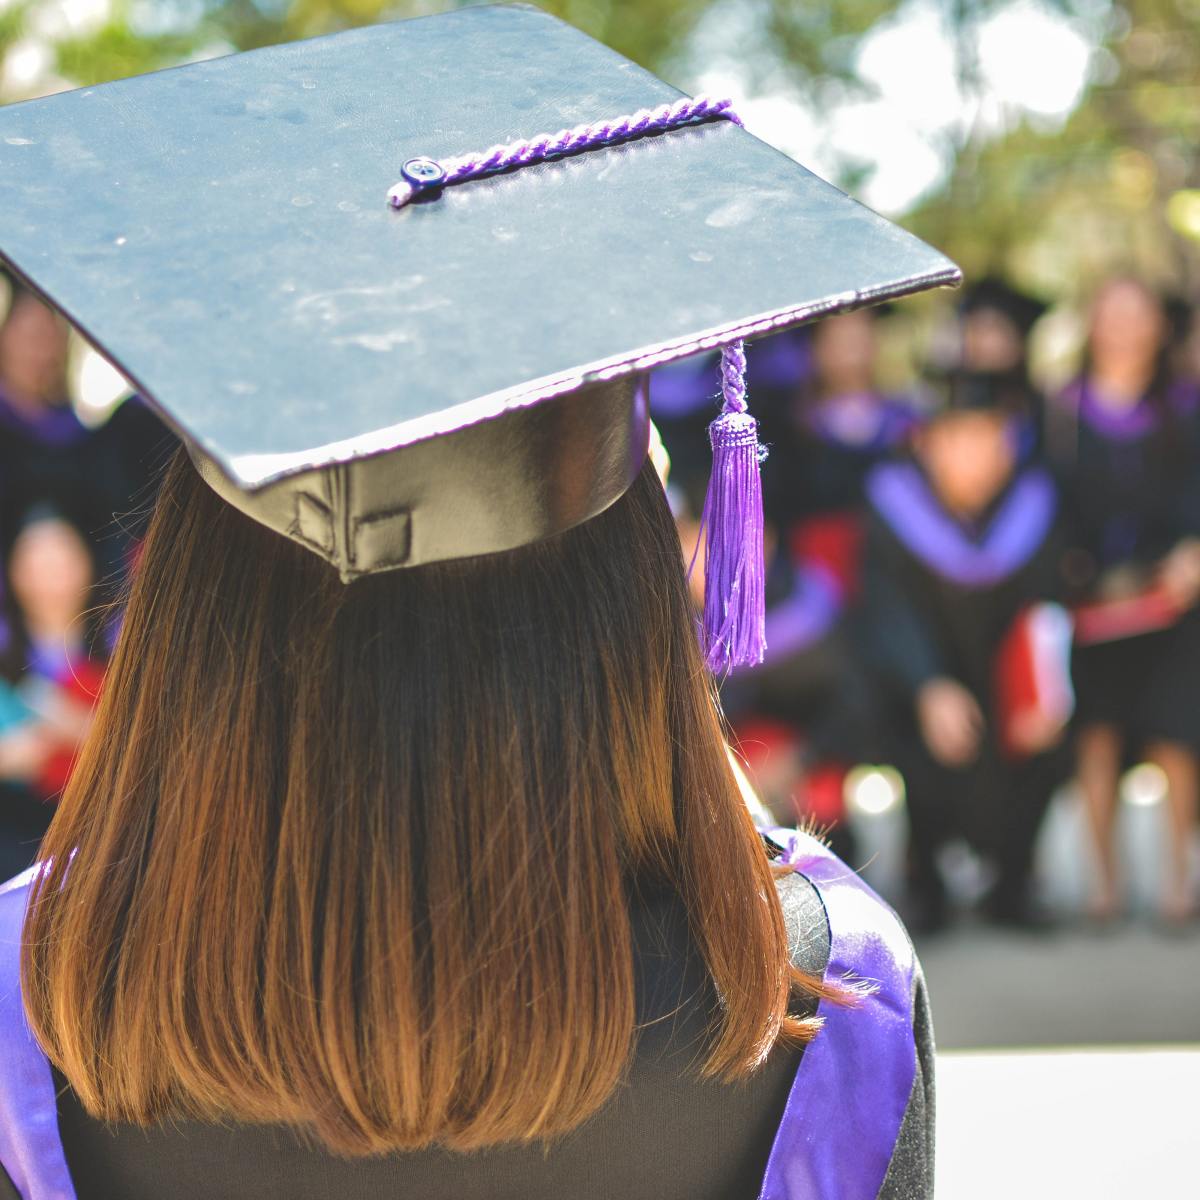 The one thing graduates should look for in an employer.